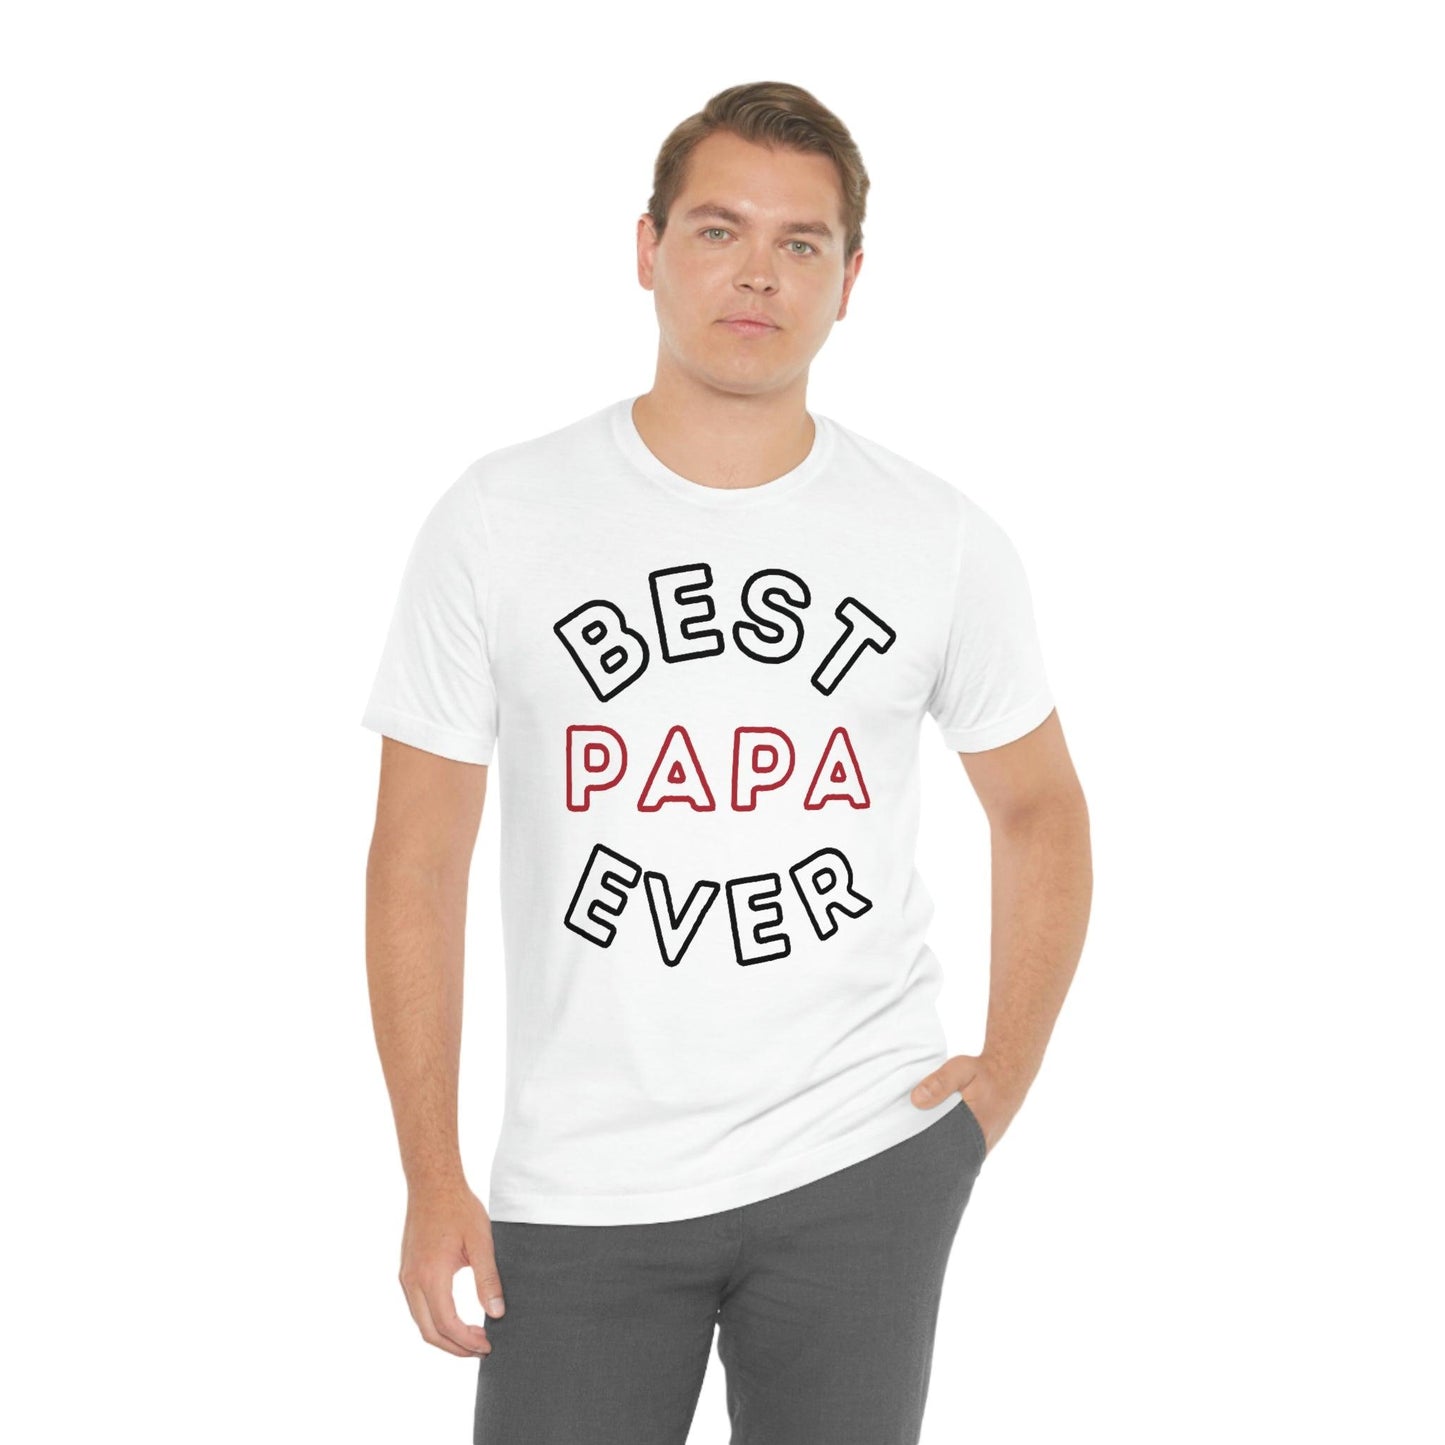 Dad Gift - Best Dad Gift - Best Papa Ever Shirt - Dad Shirt - Funny Fathers Gift - Husband Gift - Funny Dad Tshirt - Dad Birthday Gift - Giftsmojo